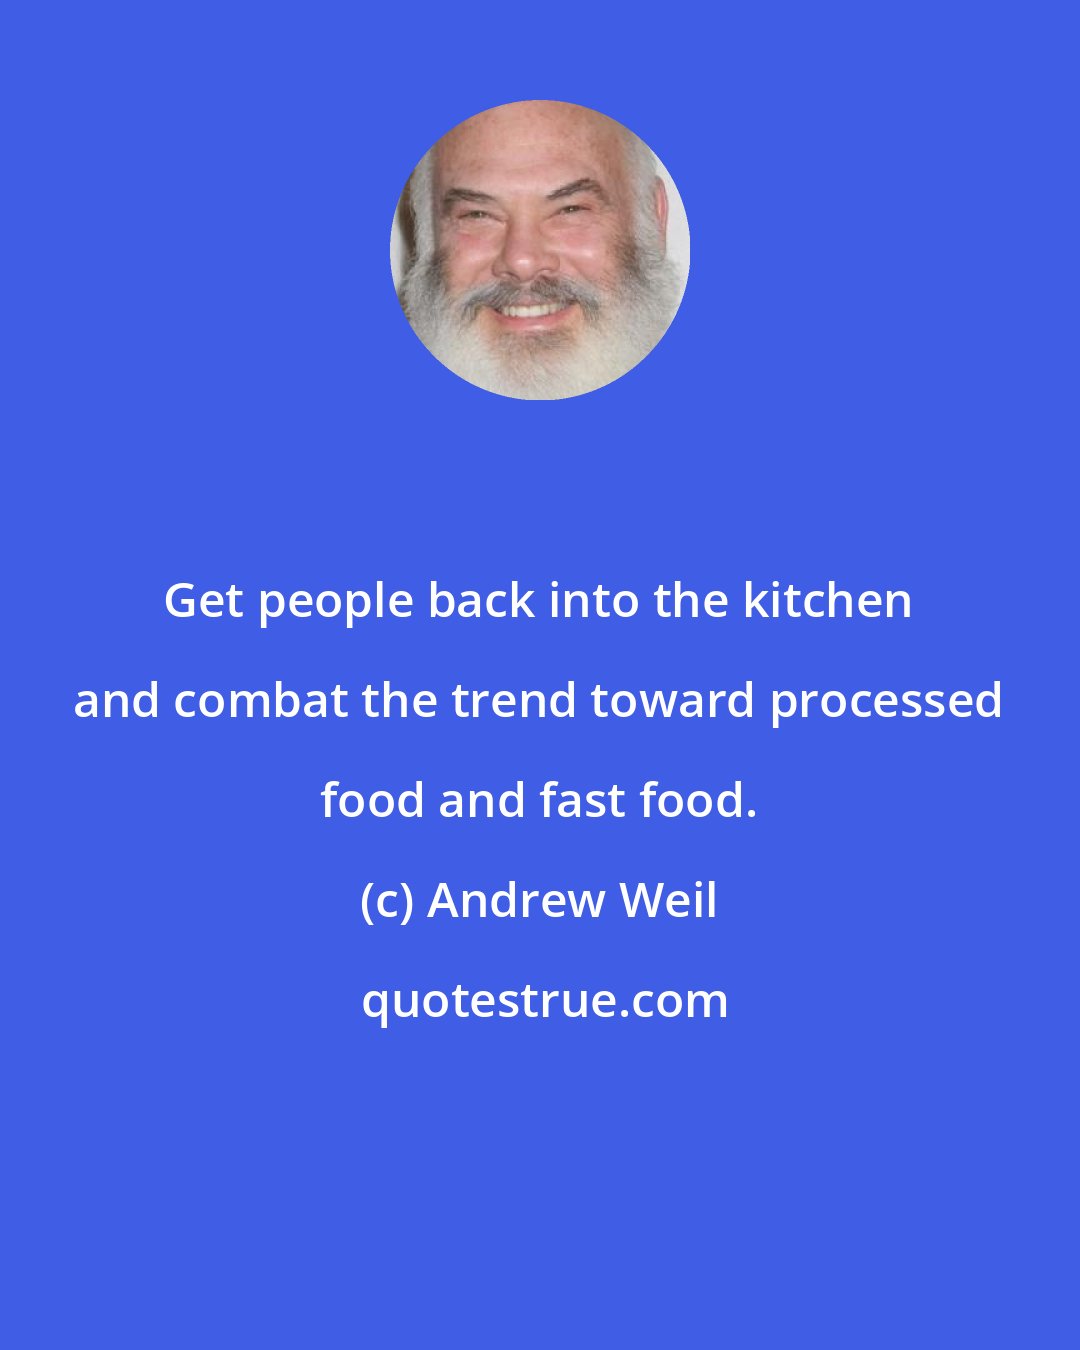 Andrew Weil: Get people back into the kitchen and combat the trend toward processed food and fast food.